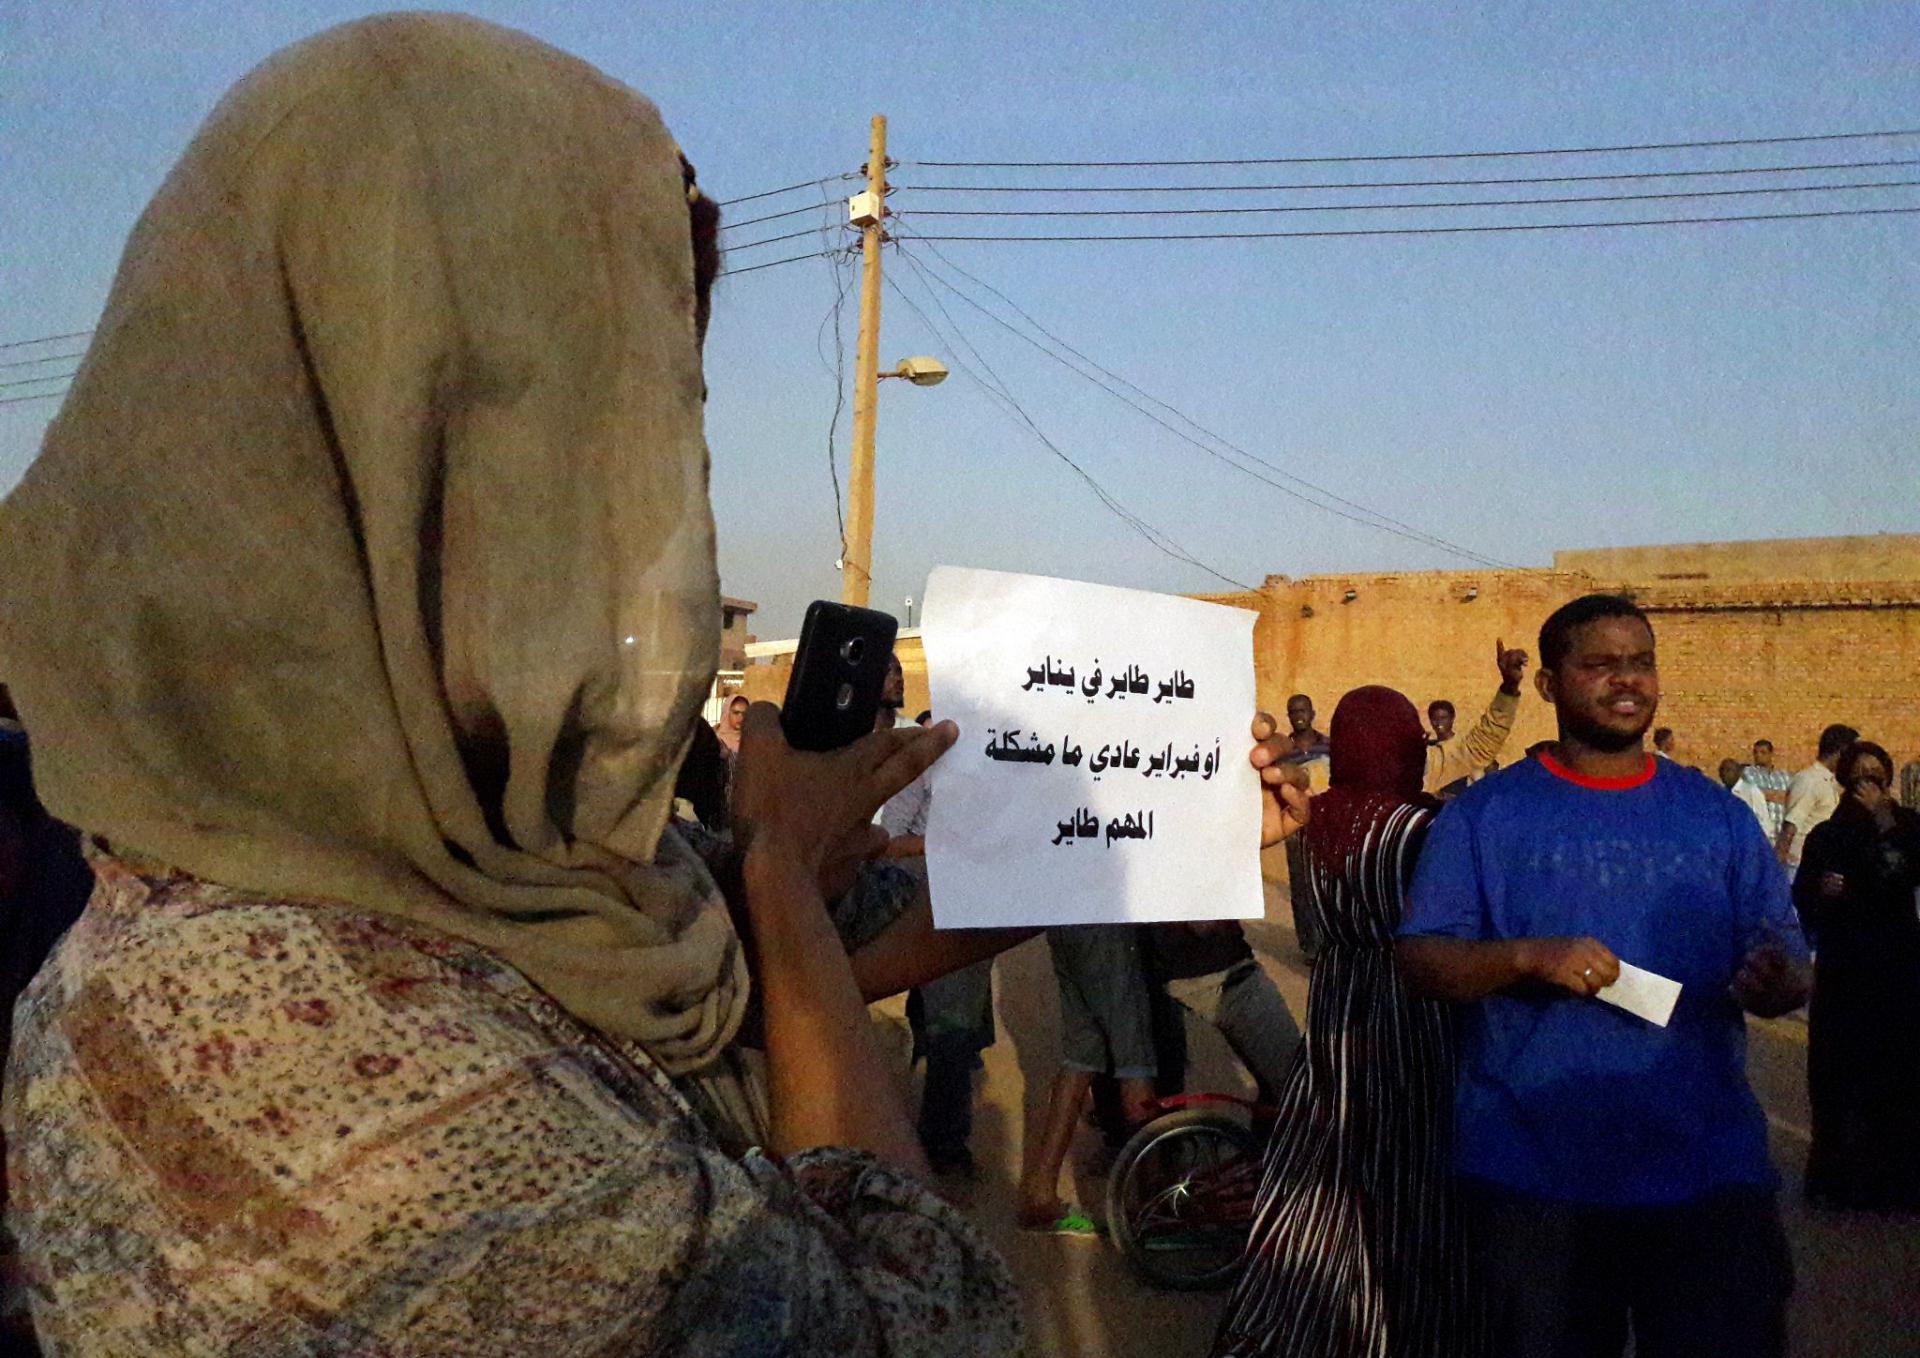 A Sudanese demonstrator carries a placard which reads in Arabic "You will leave in January, or February, no problem, as long as you are leaving," as he attends a sit-in on January 27, 2019, in the Bahri neighbourhood, north of the capital Khartoum.